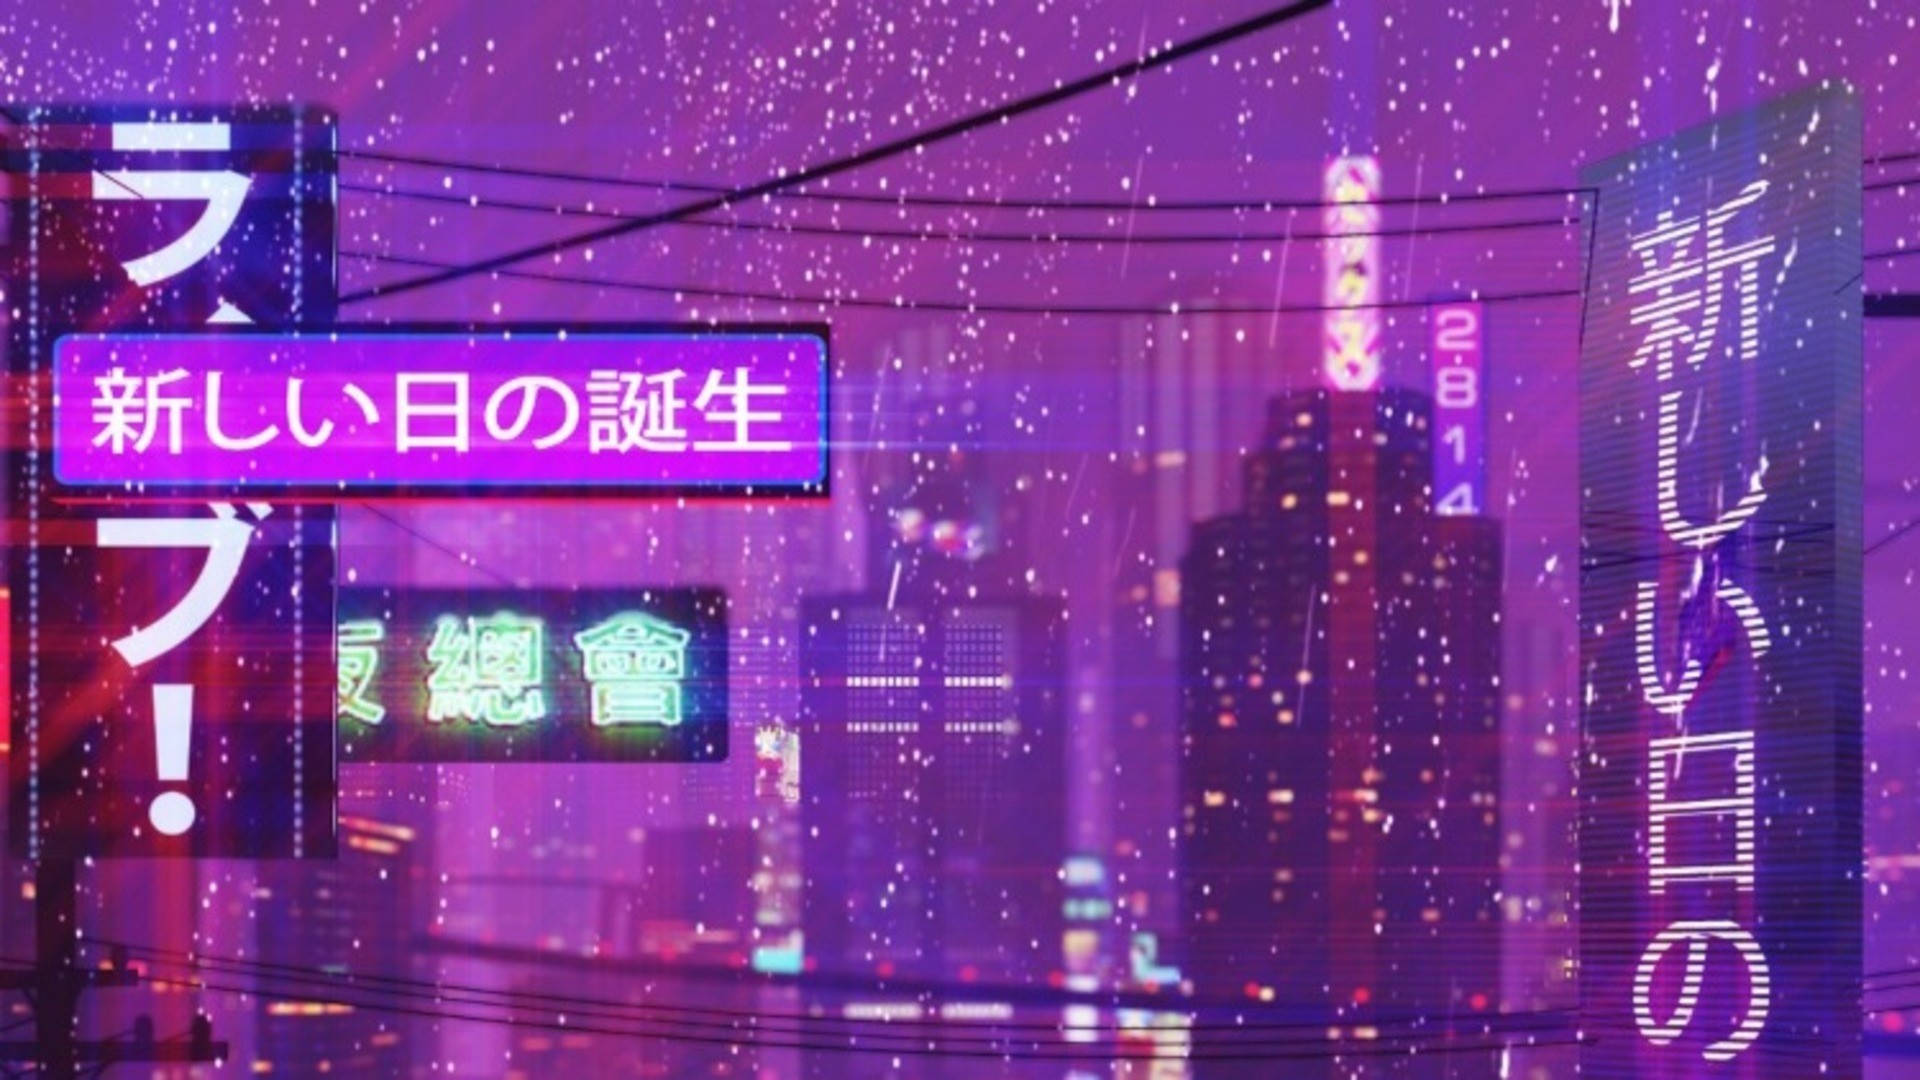 A Surreal Cityscape of Purple and Blue Wallpaper